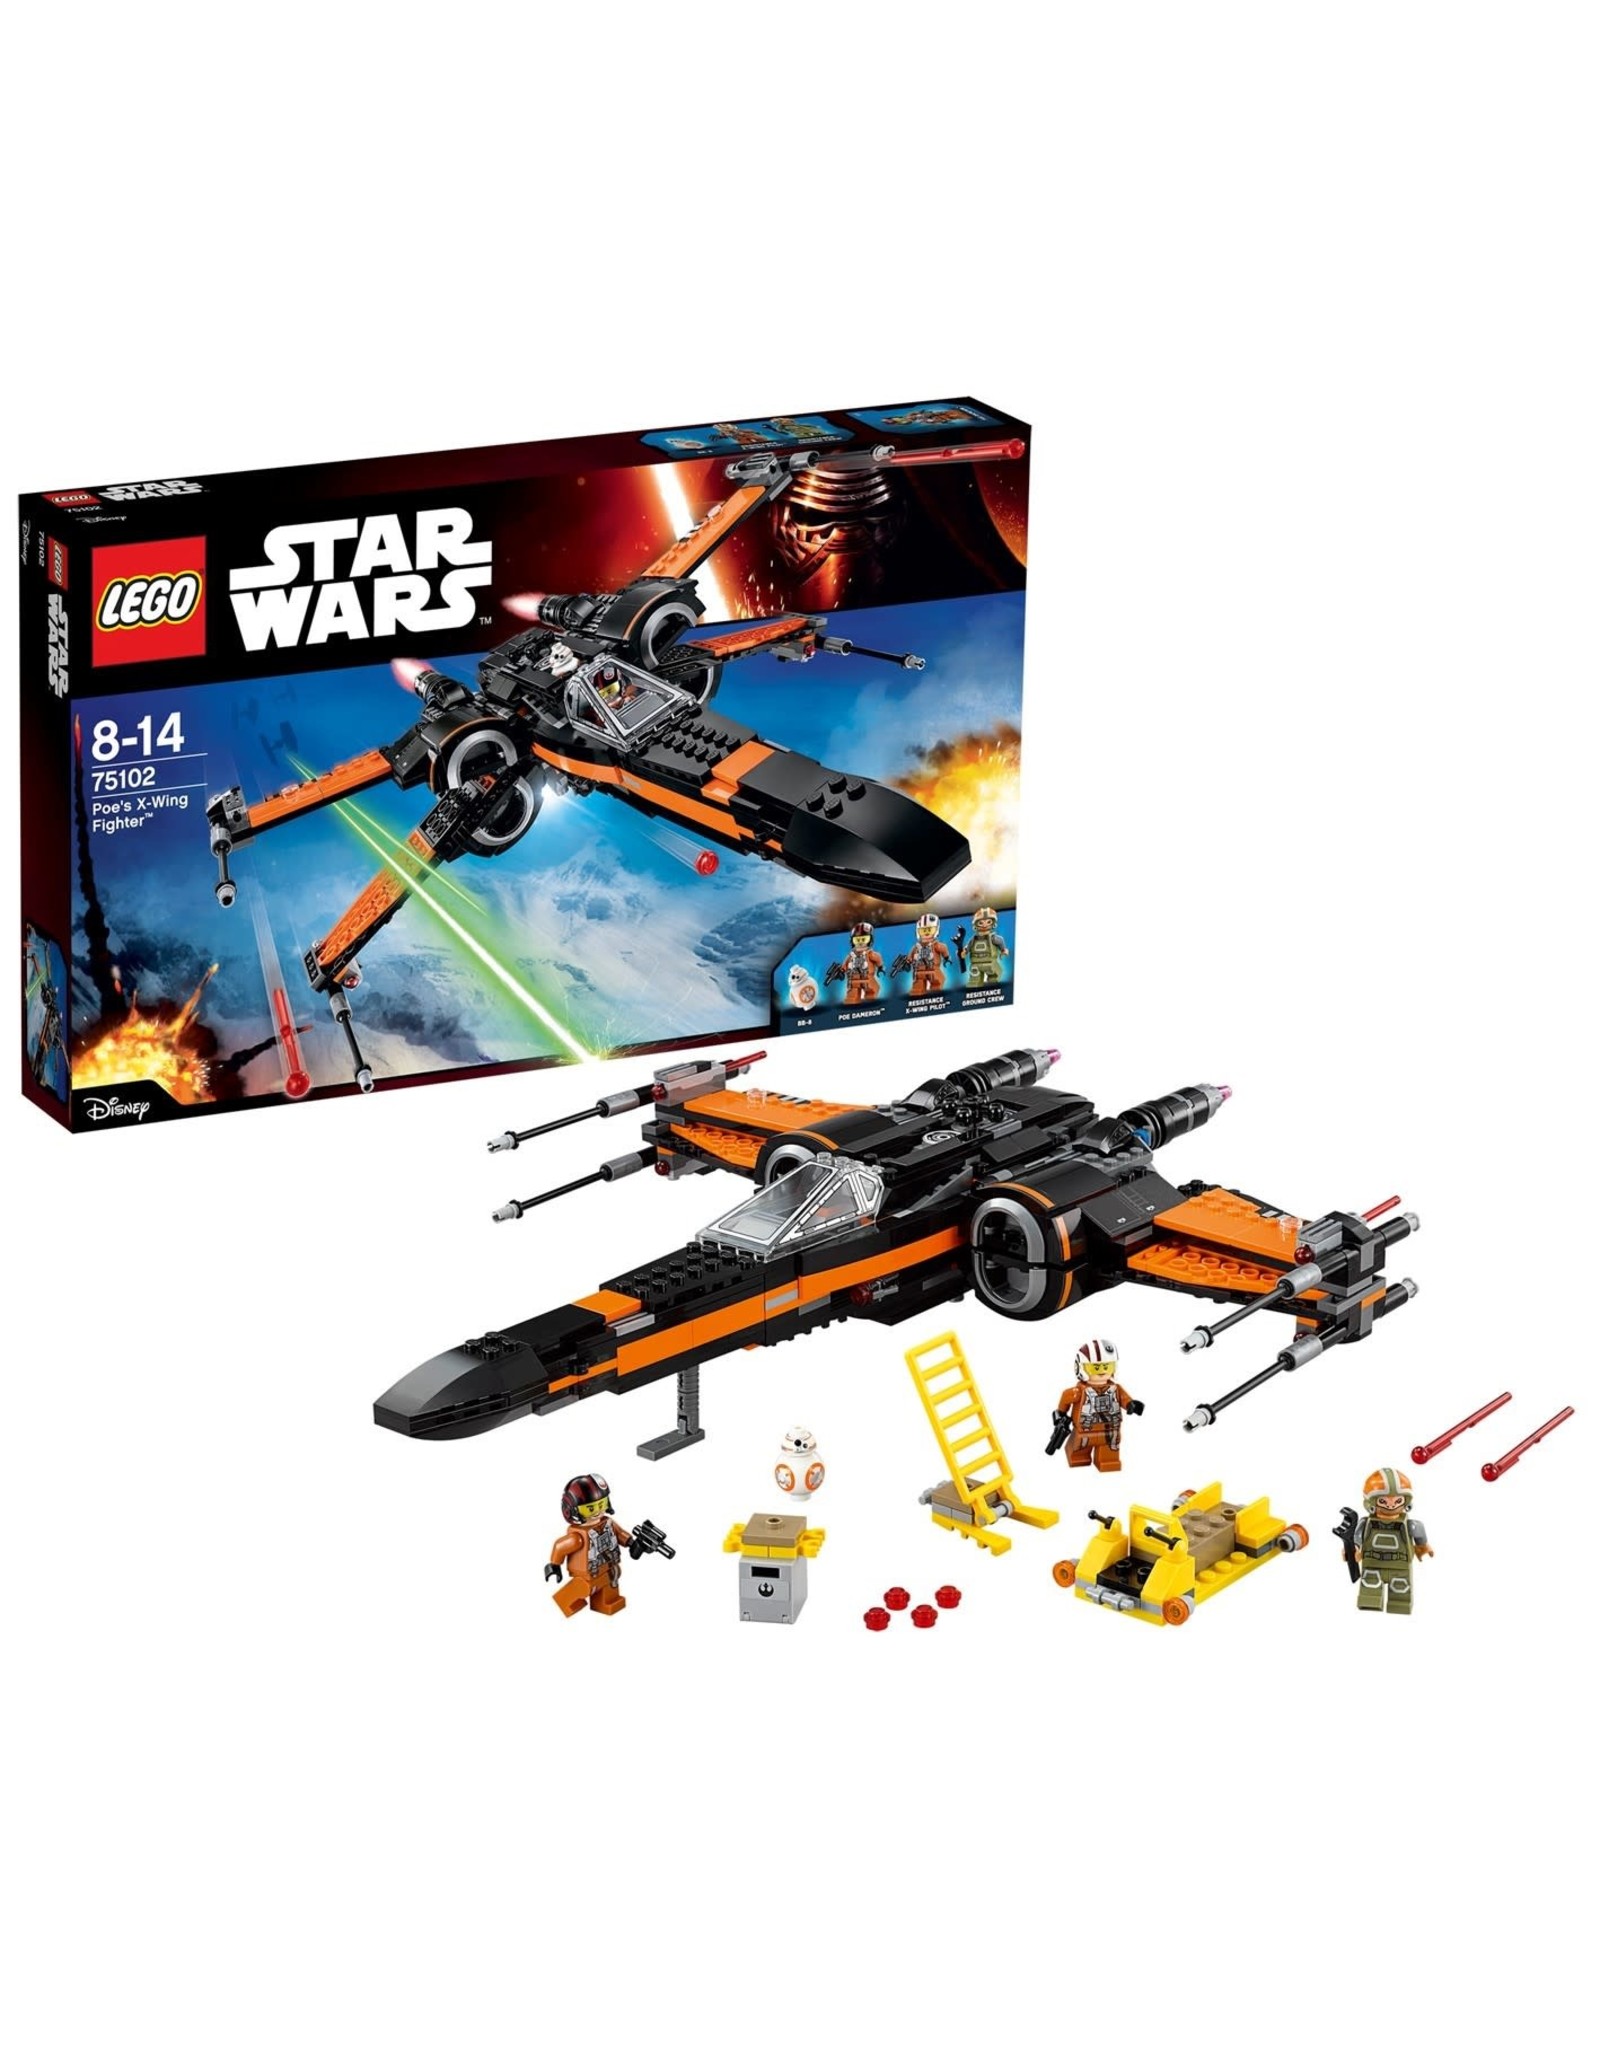 LEGO Lego Star Wars 75102 Poe's X-Wing Fighter